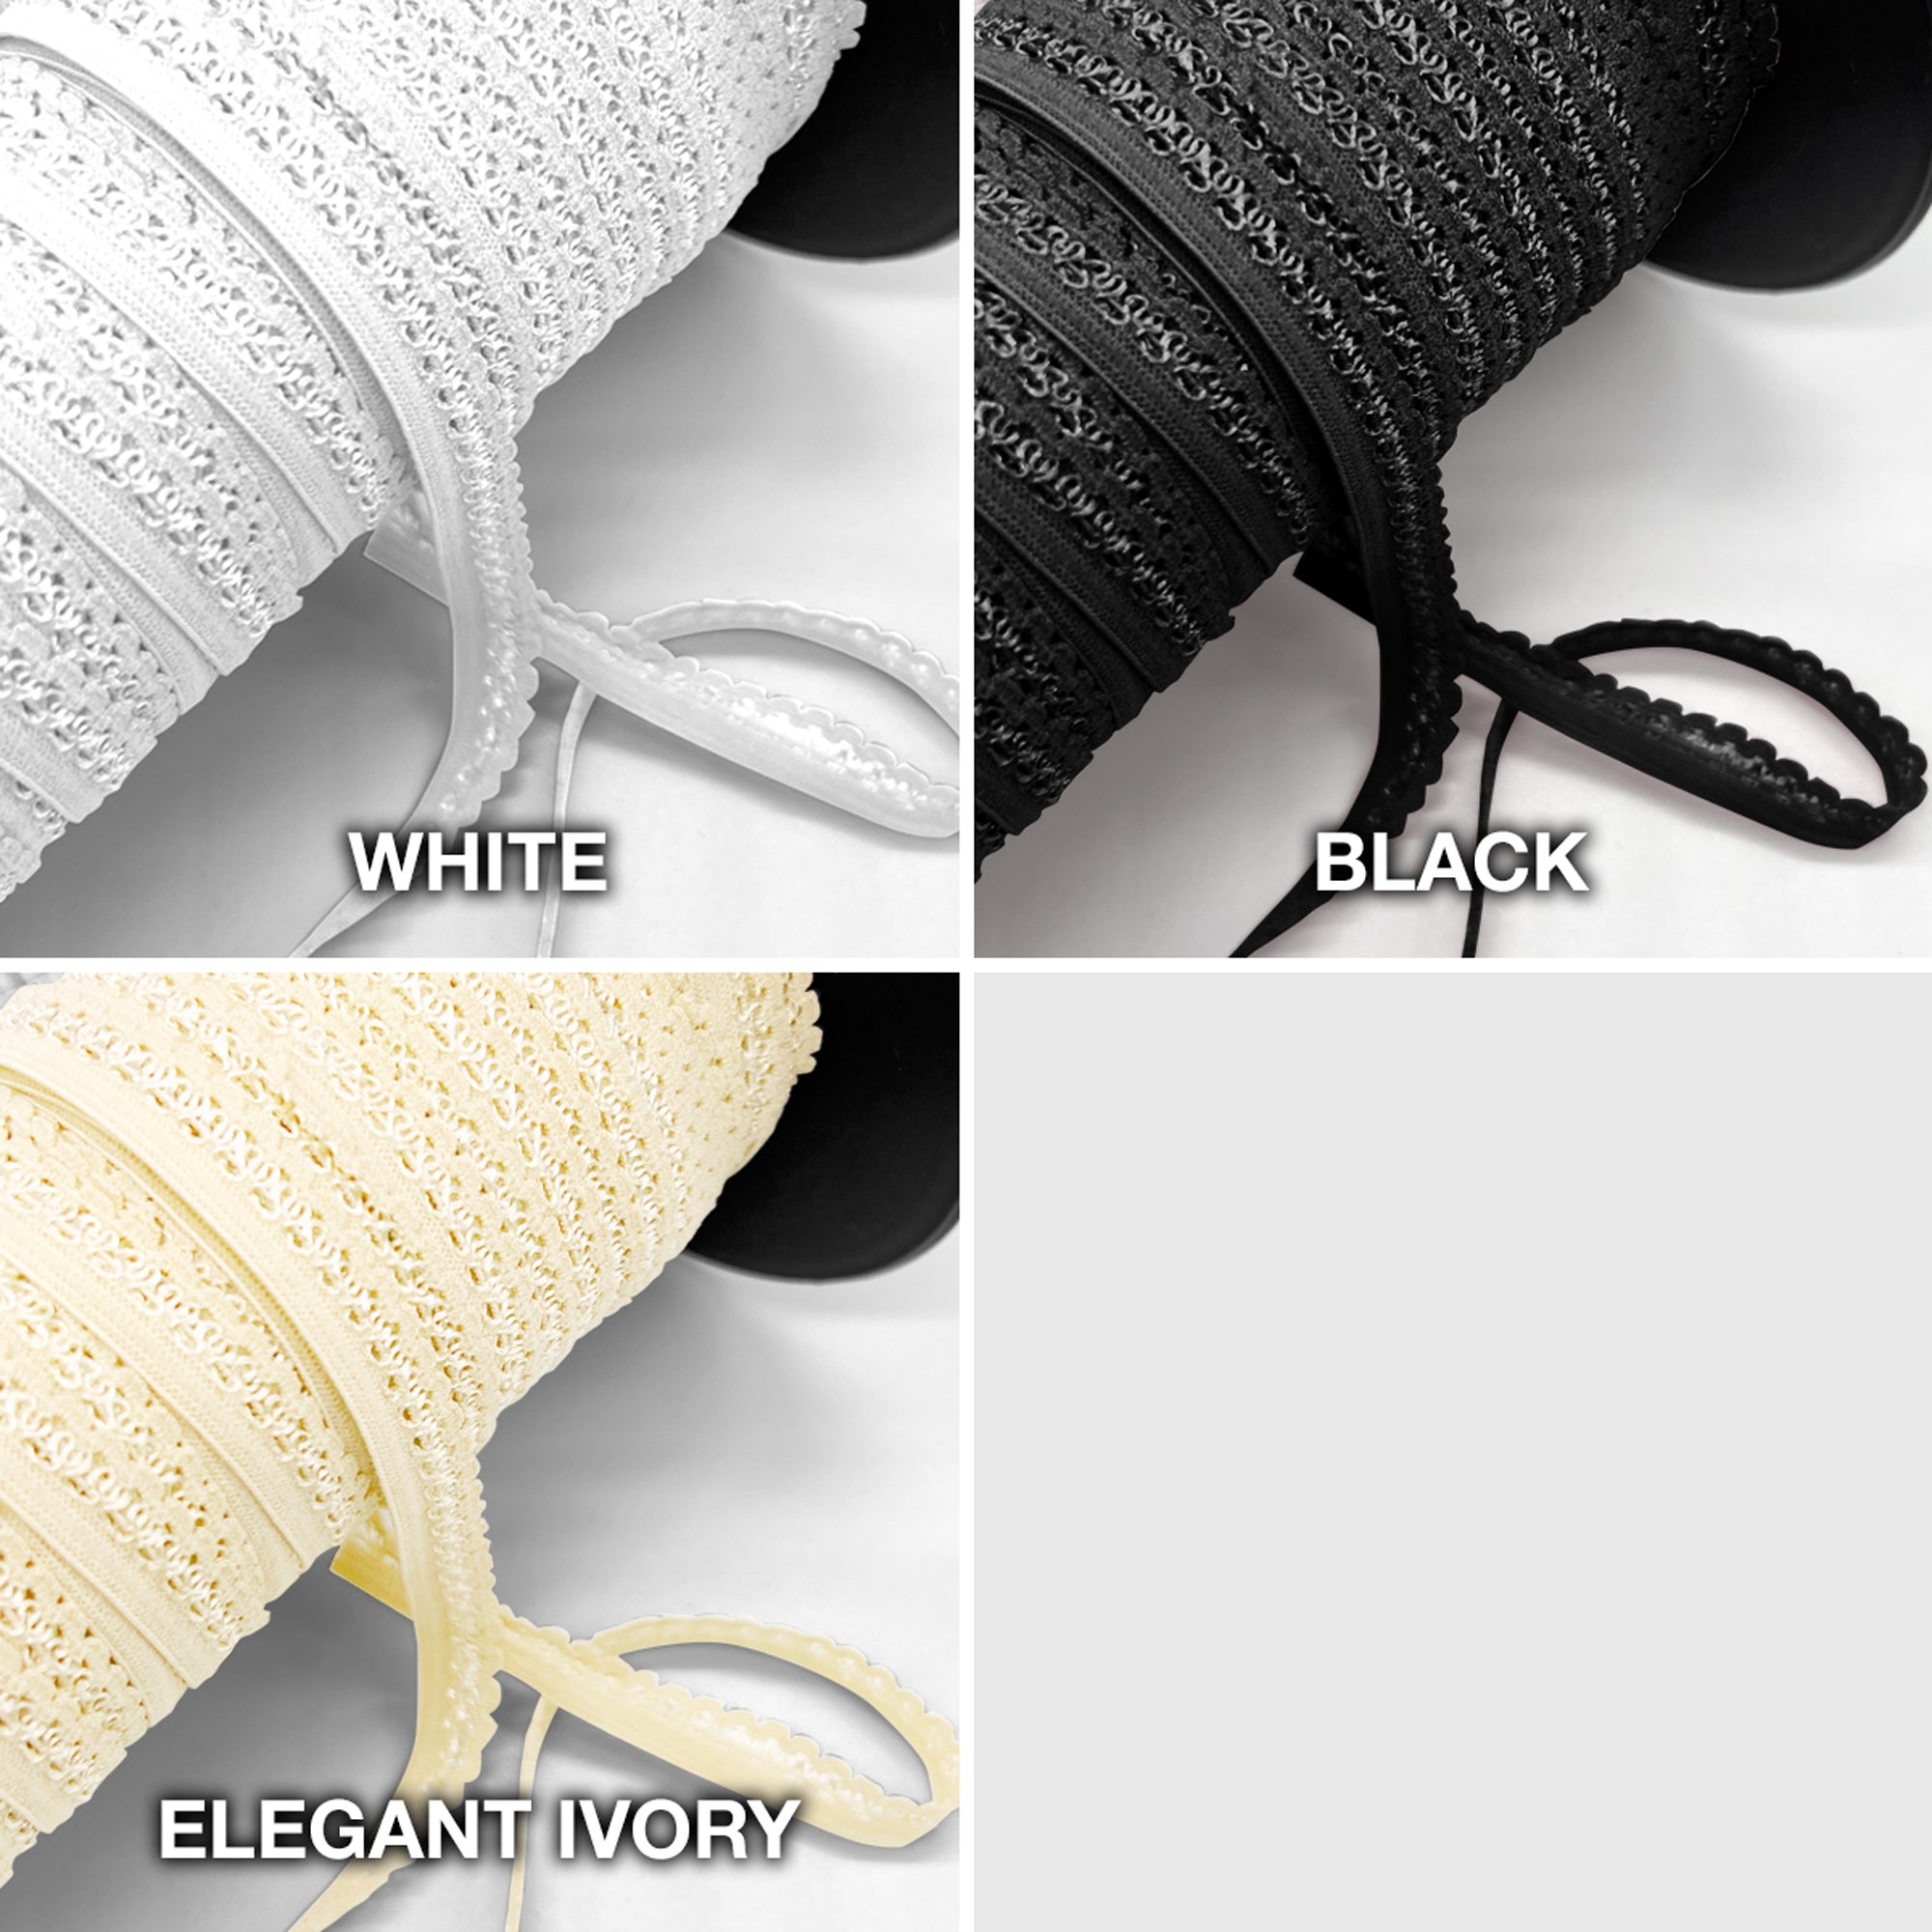 TO BE DISCONTINUED- 1/4" (6mm), 3/8" (10mm) edge to edge, Decorative Picot Elastic- 2 Yards - Stitch Love Studio